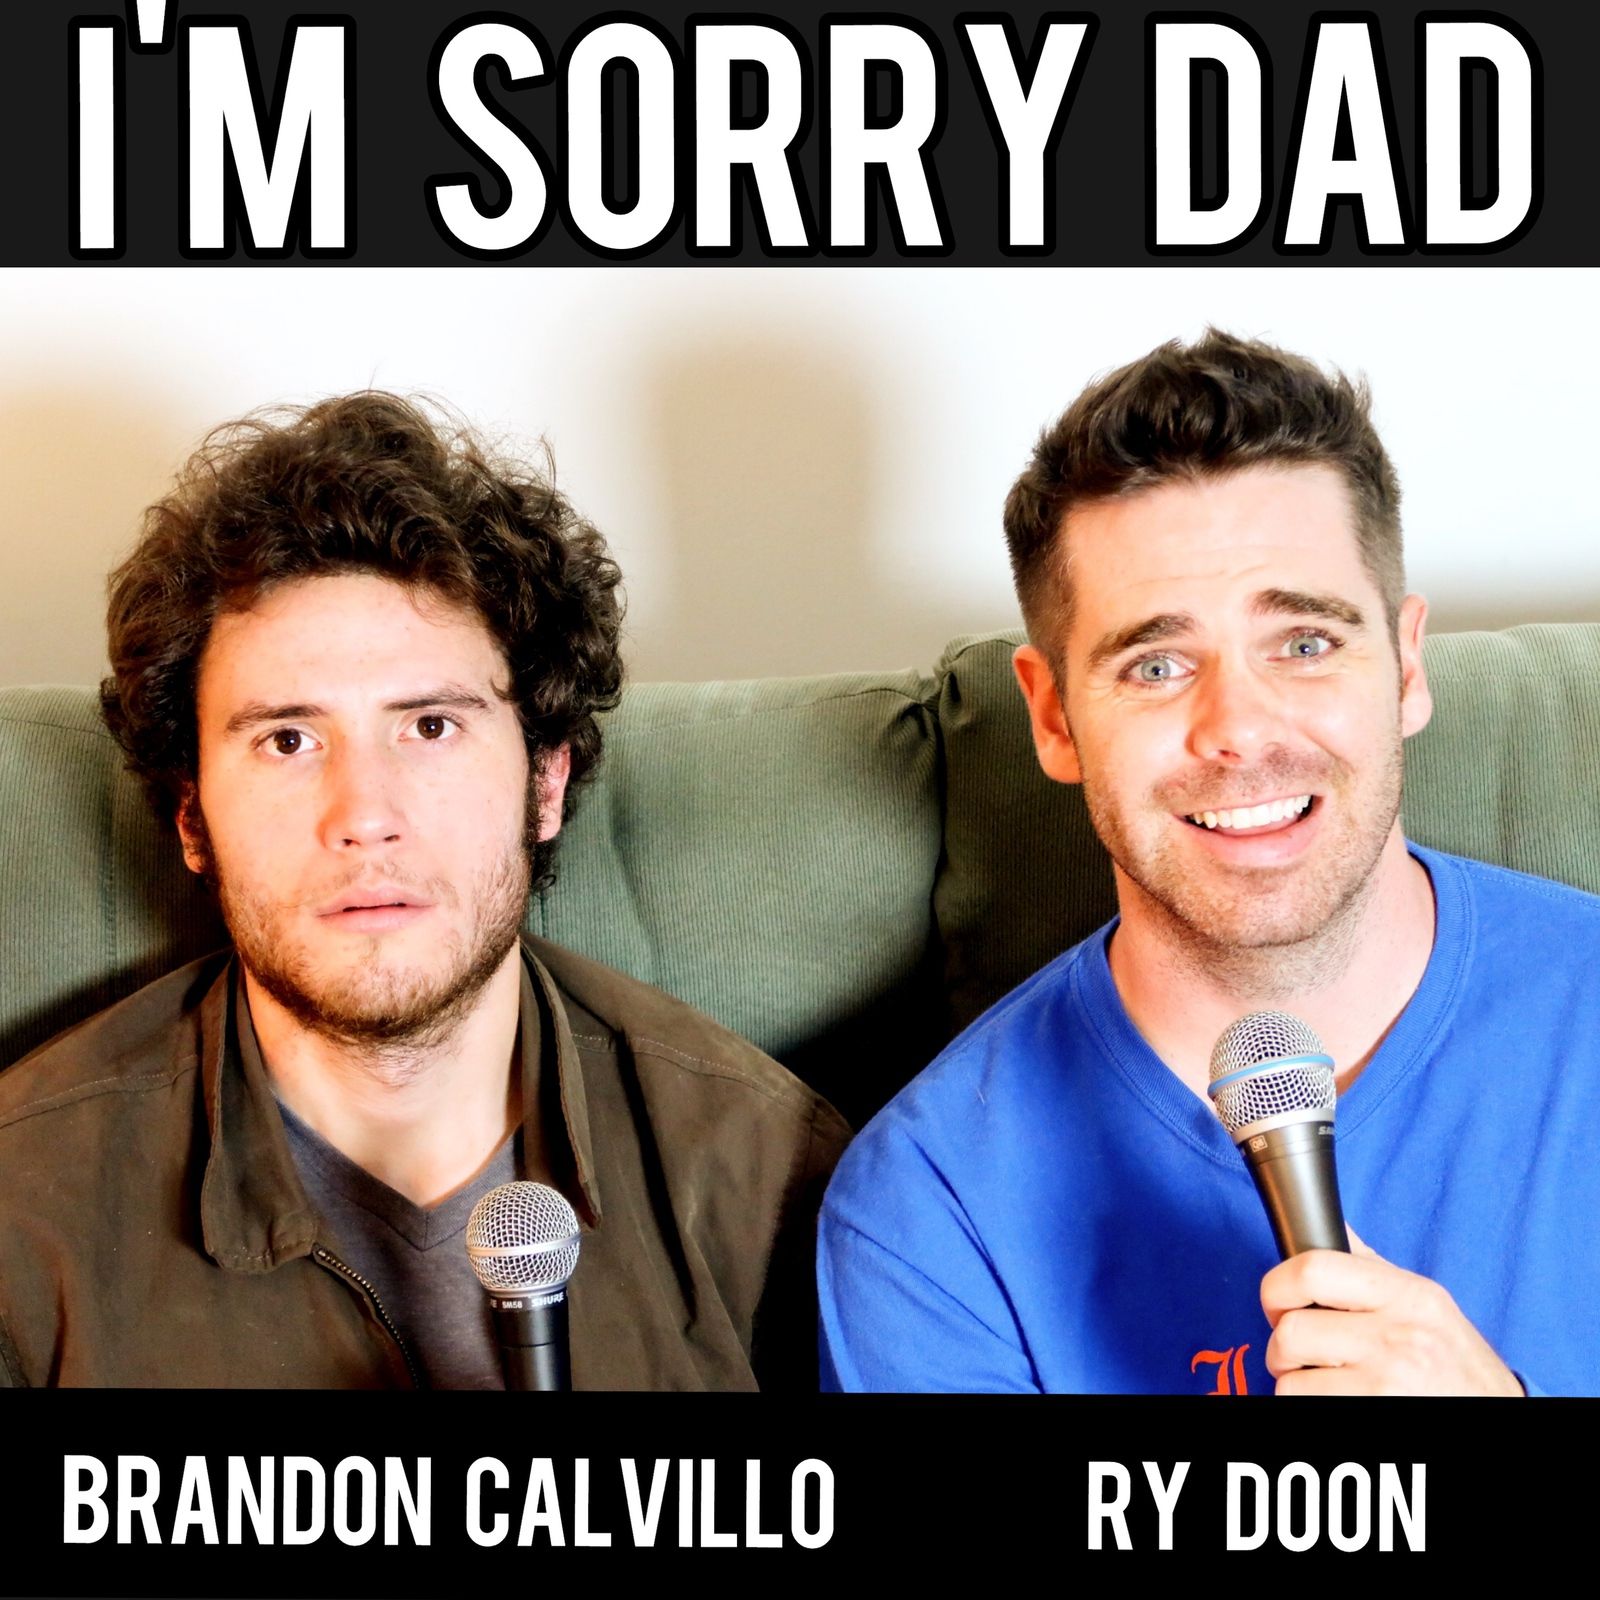 I'm Sorry Dad introduction mini-episode!